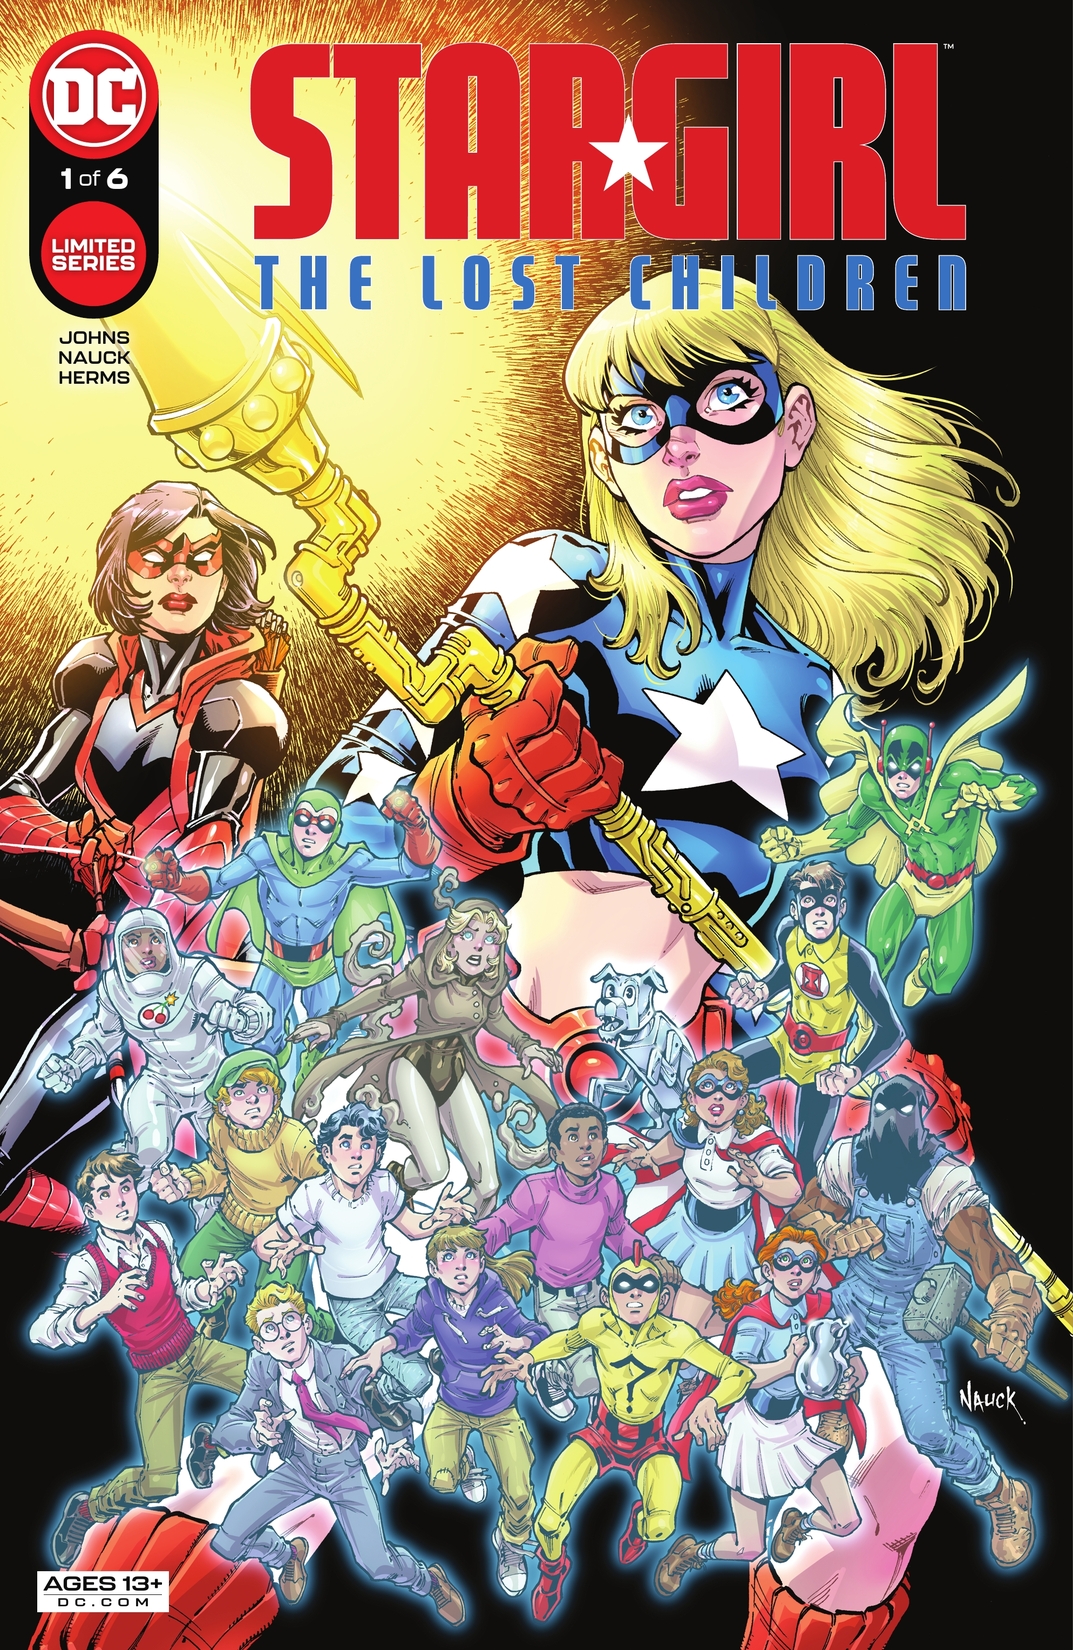 Stargirl: The Lost Children #1 preview images